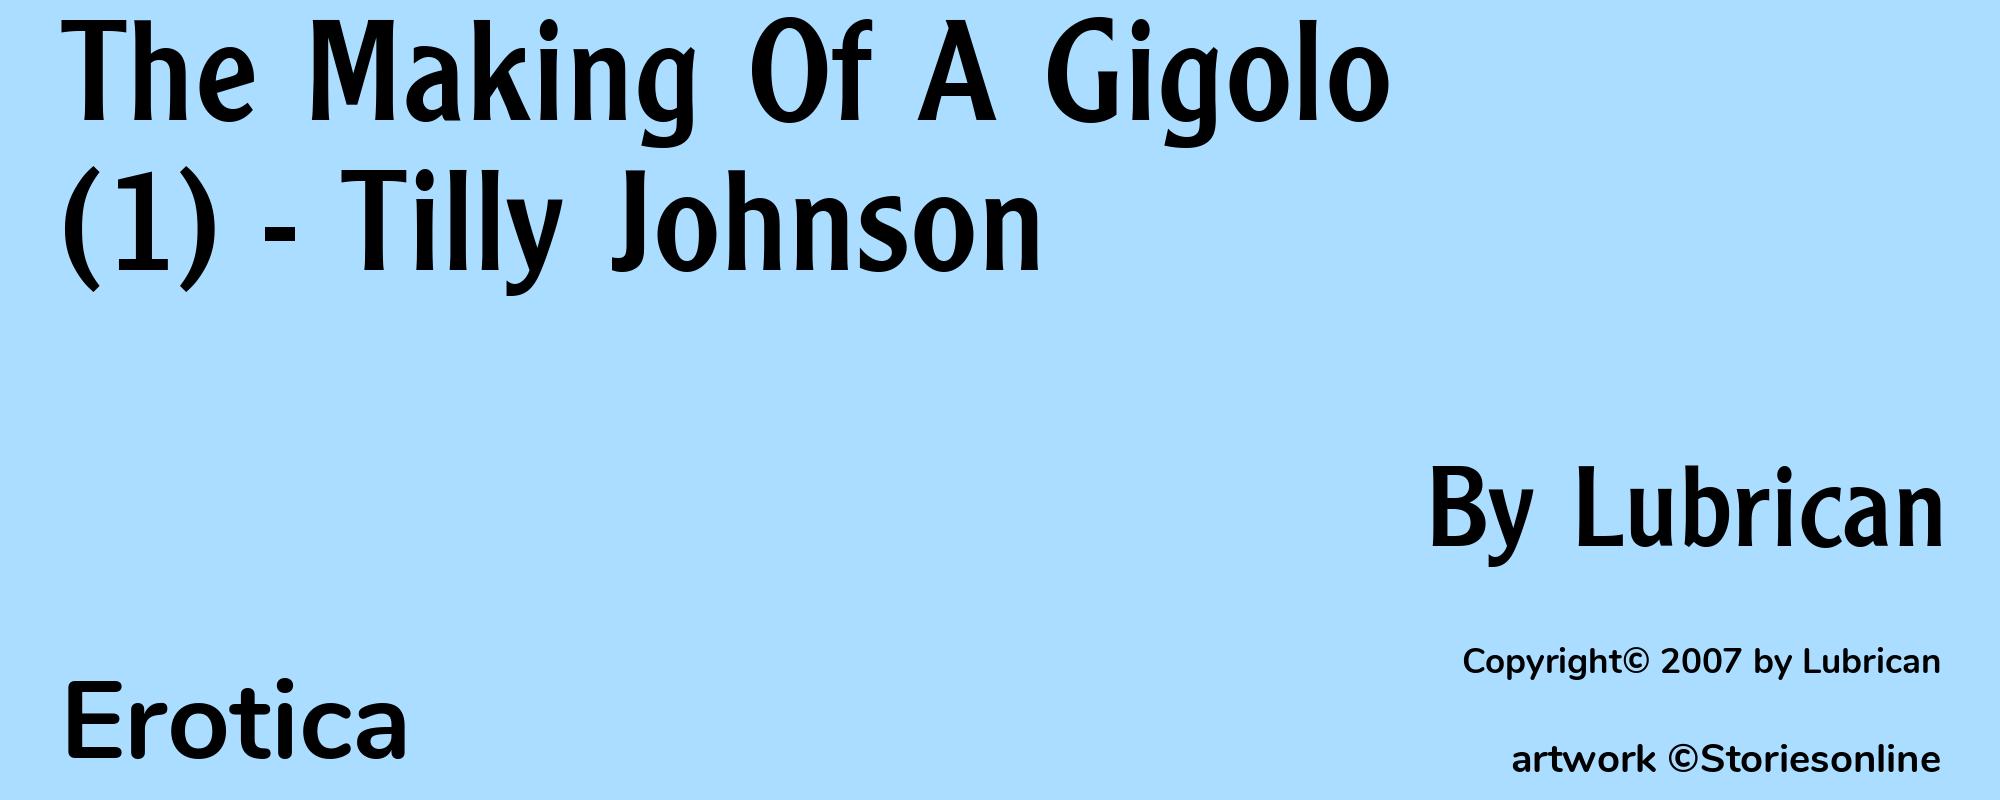 The Making Of A Gigolo (1) - Tilly Johnson - Cover